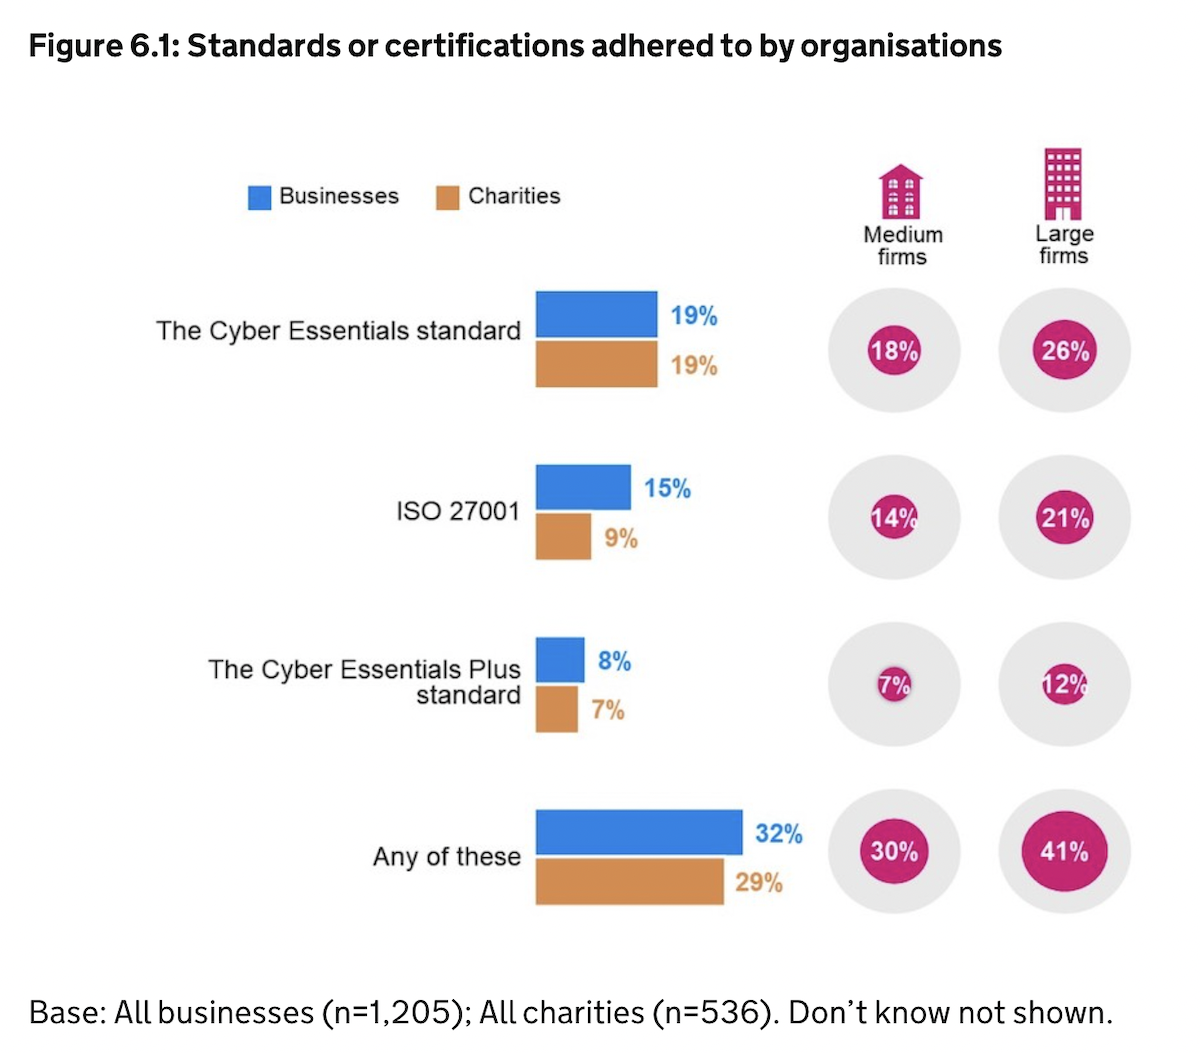 Break down of standards or certifications adhered to by organisations in the UK